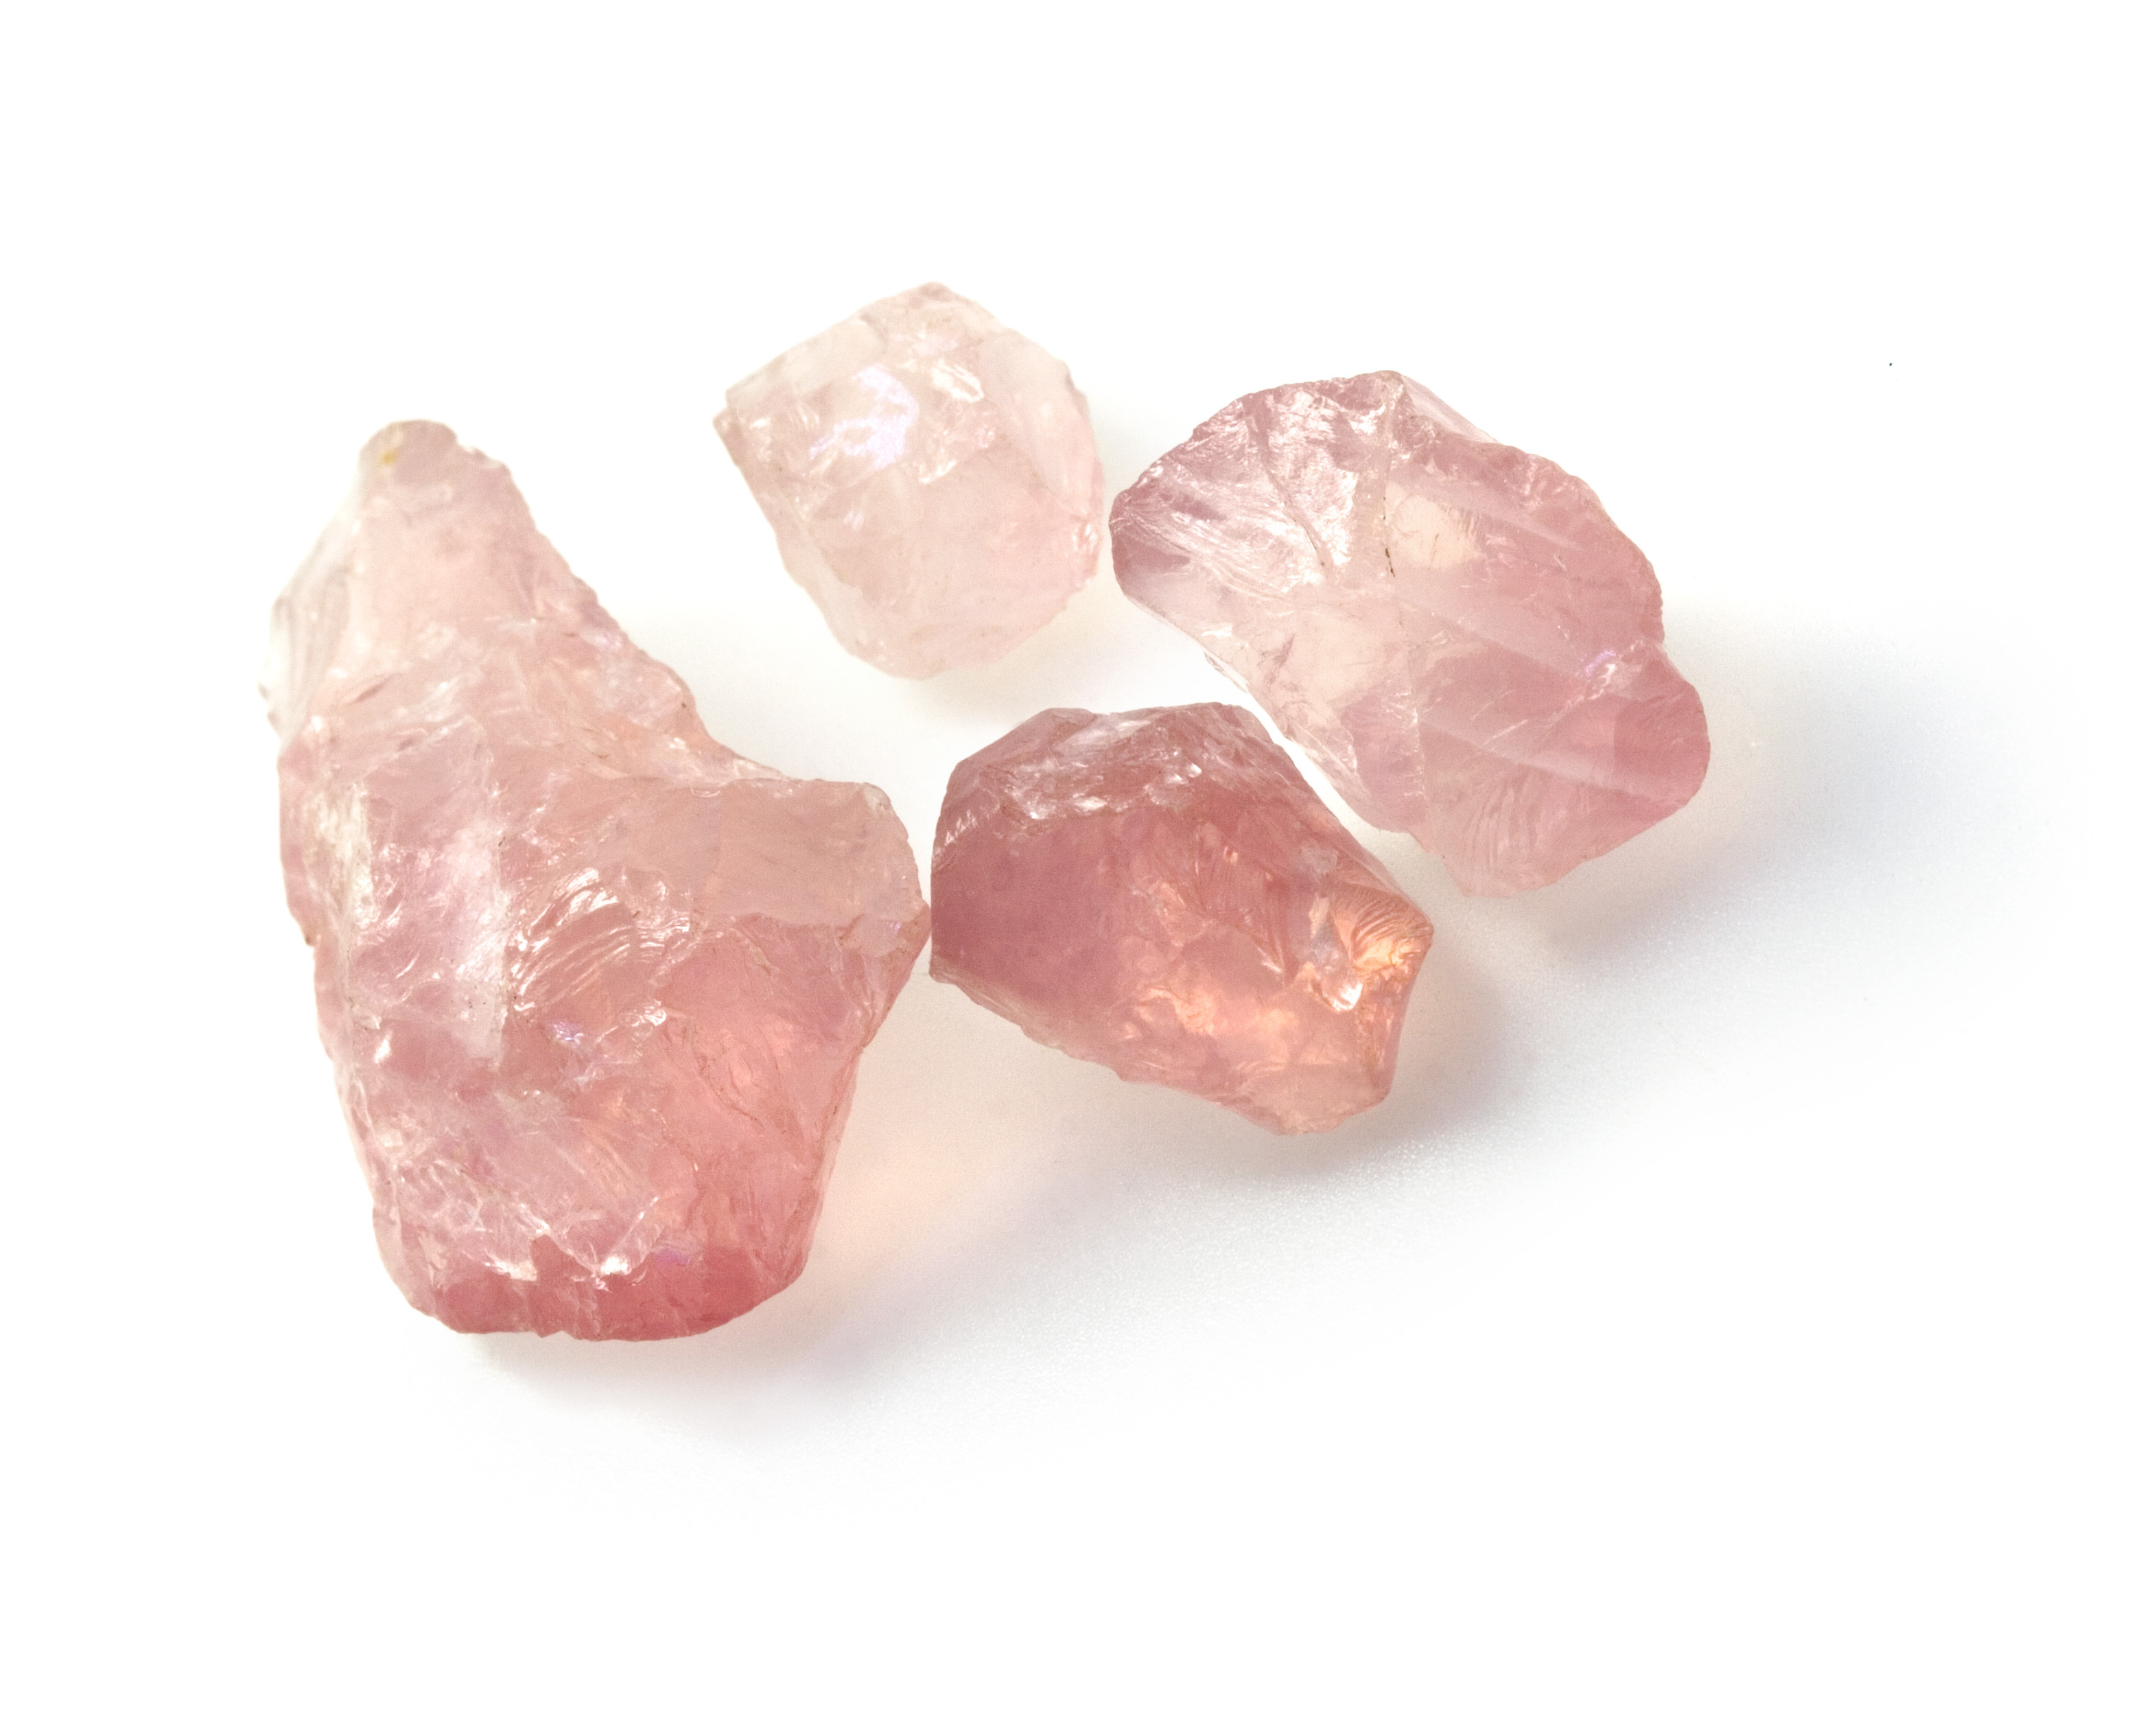 Multiple pieces of Rose Quartz on a white background